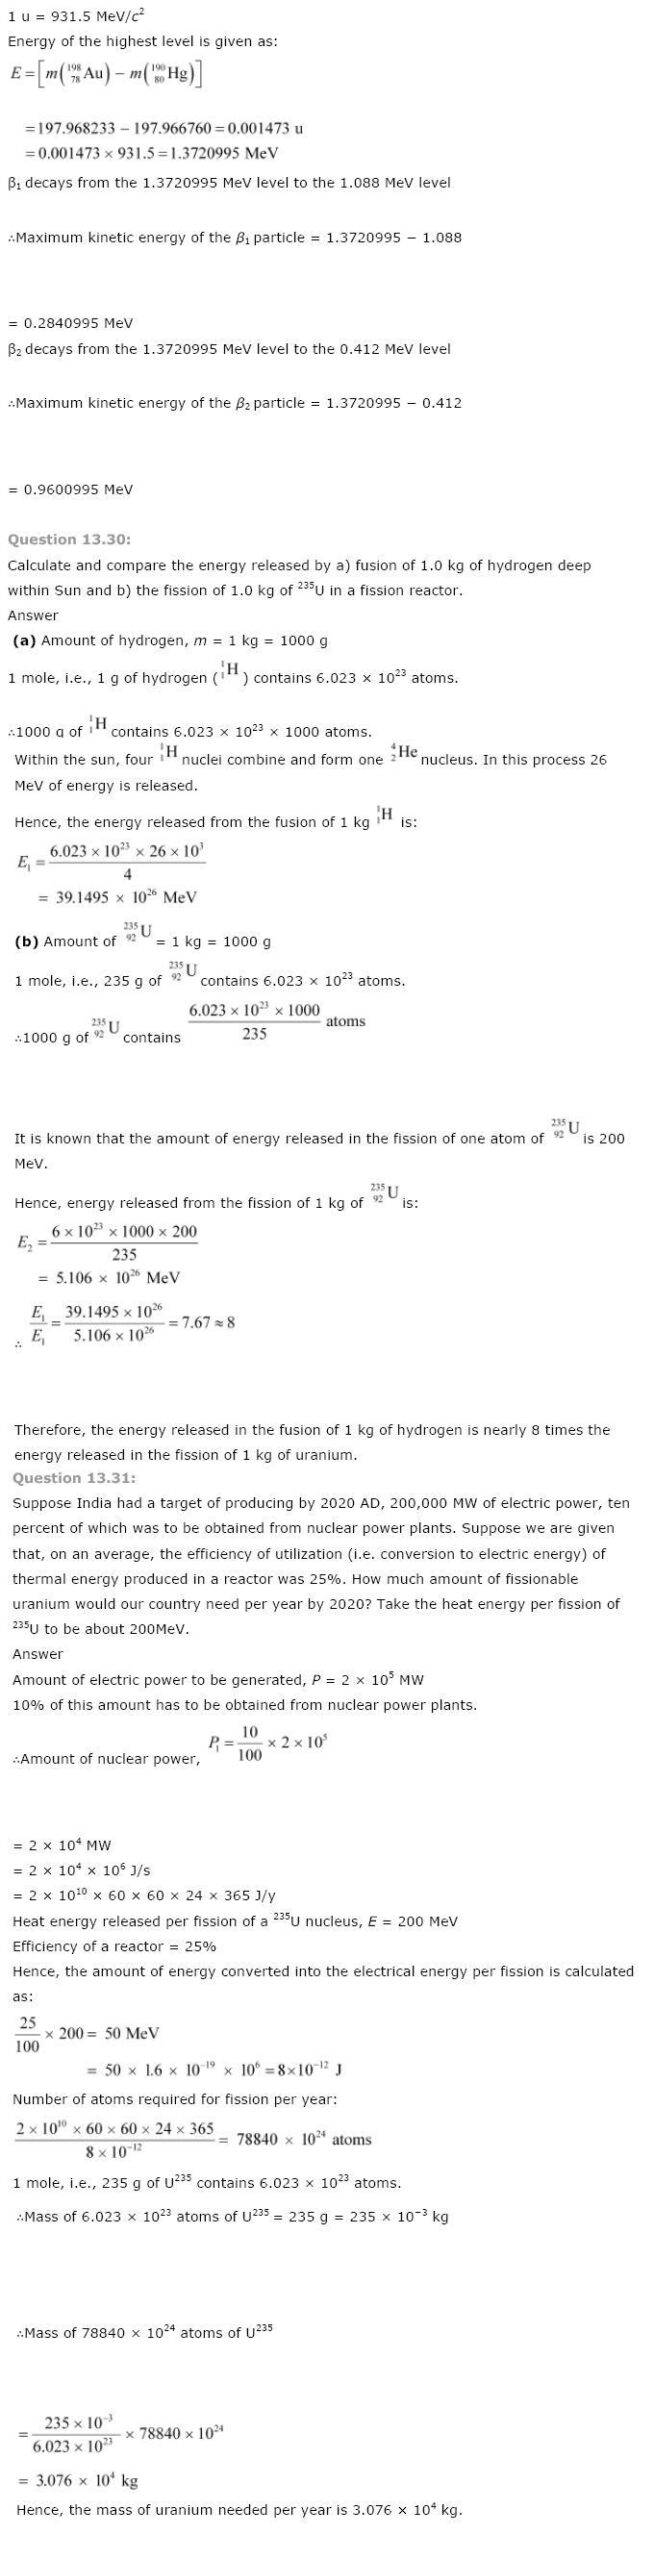 NCERT Solutions For Class 12 Physics Chapter 13 Nuclei 7